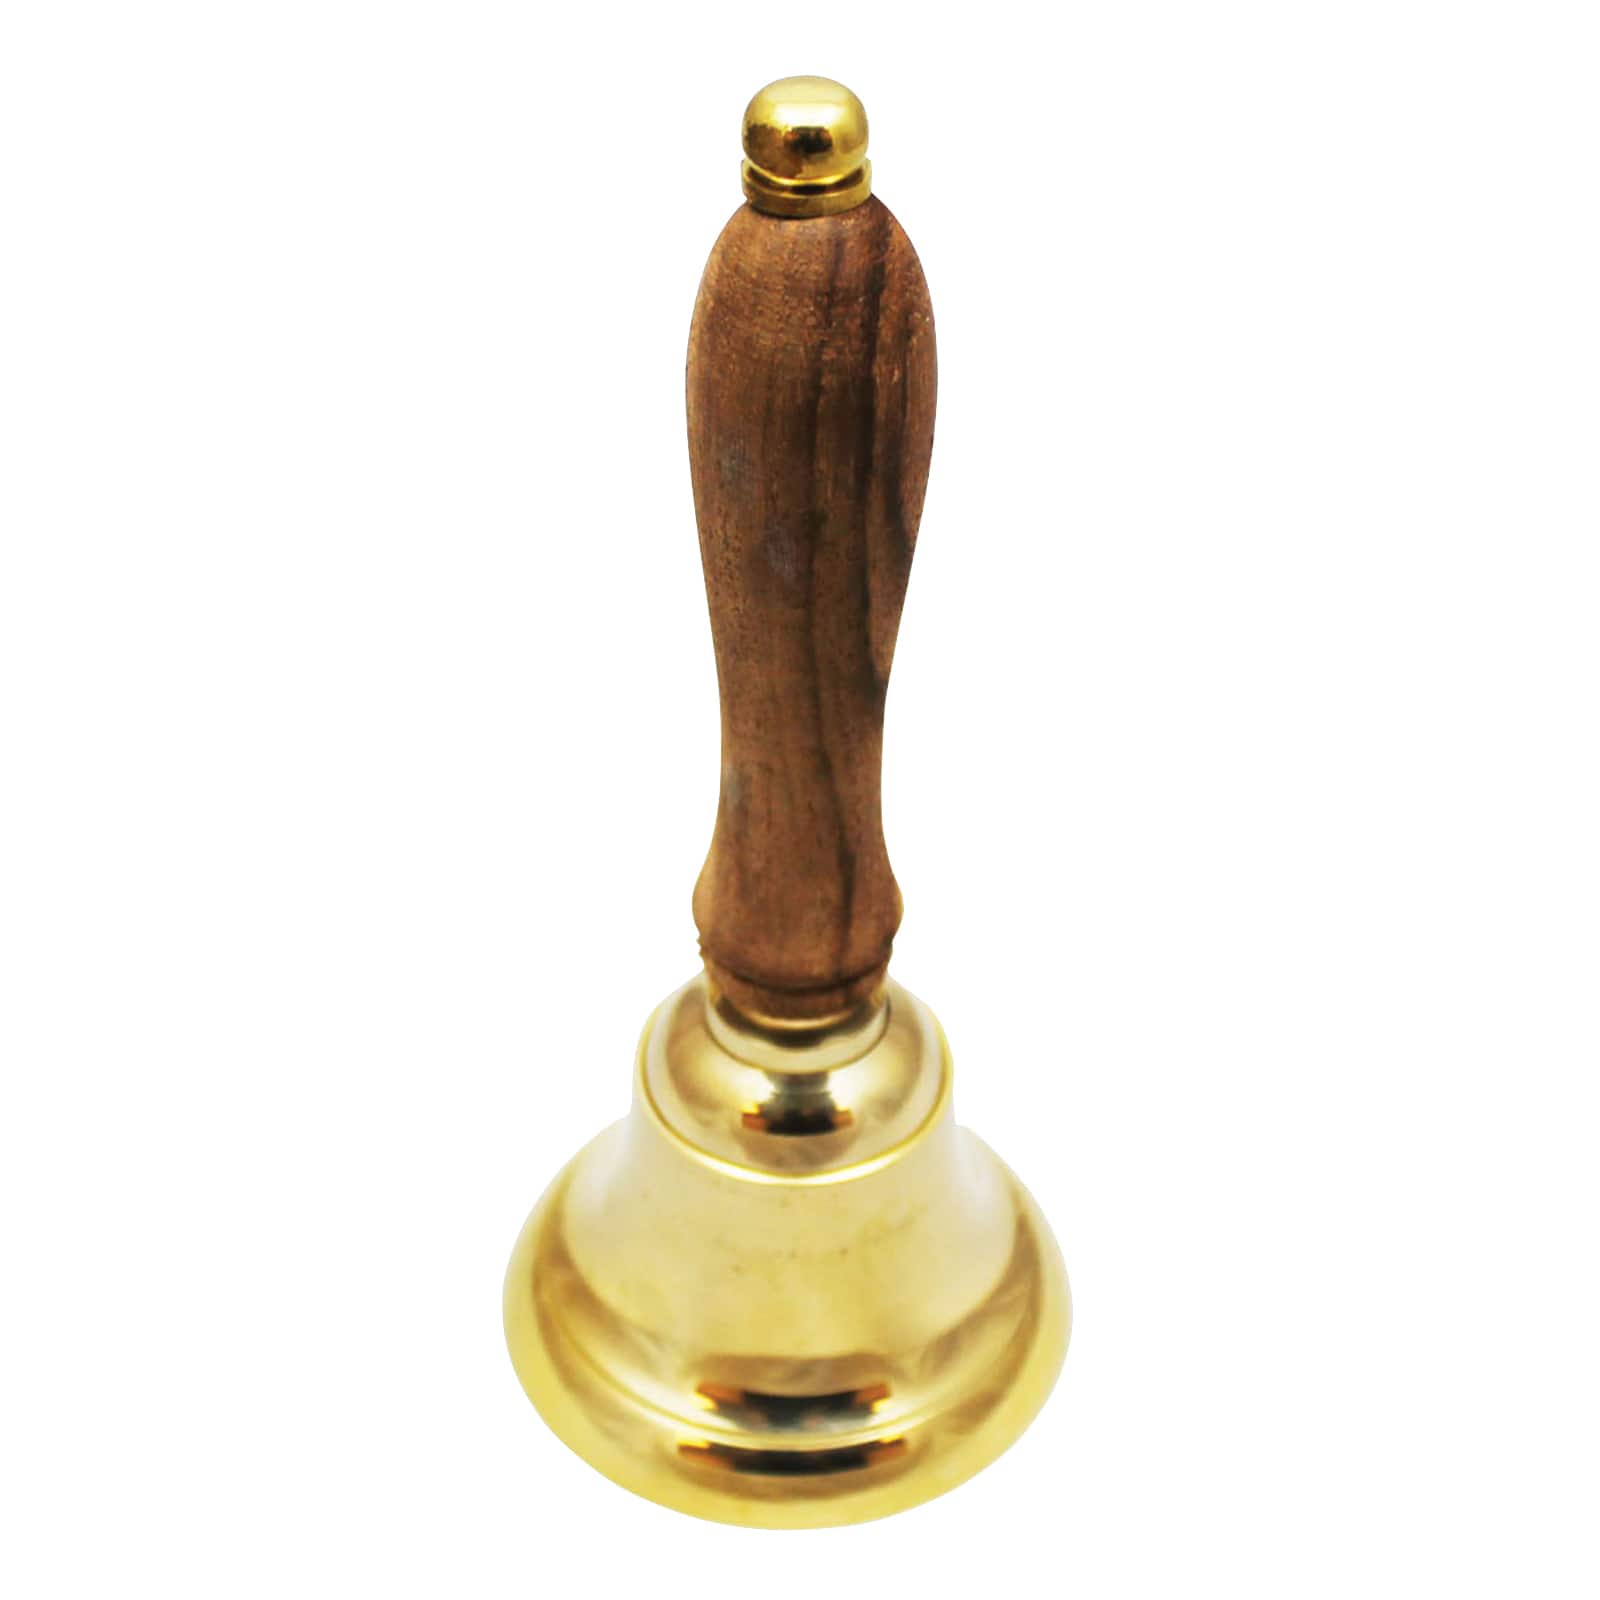 Purchase the 6.5" School Hand Bell at Michaels